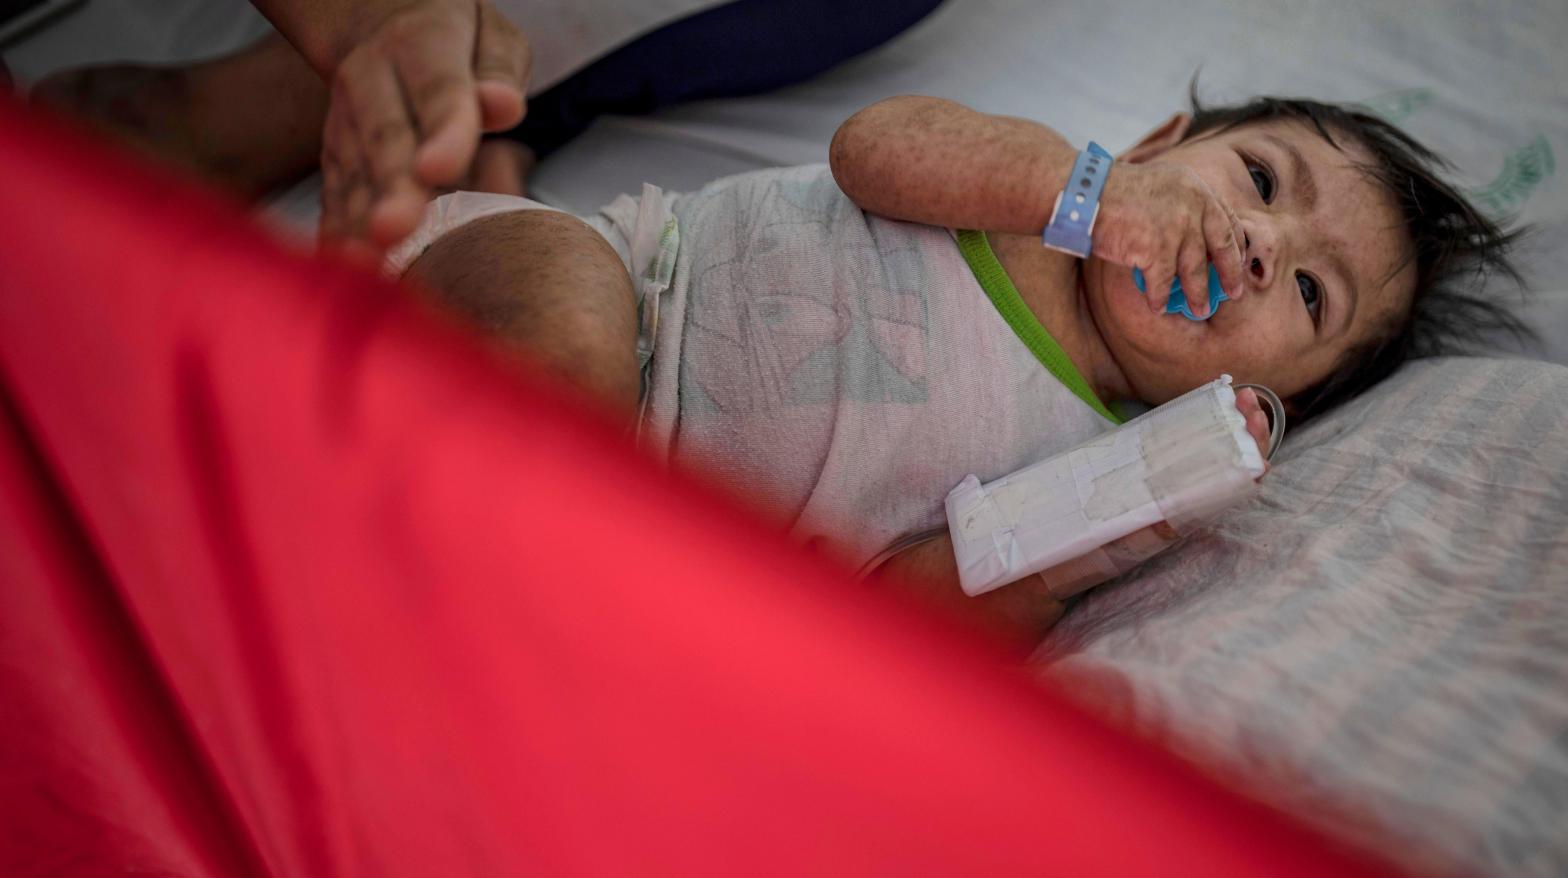 A child suffering from measles is treated at a  hospital on May 4, 2019 in Manila, Philippines.  (Photo: Ezra Acayan, Getty Images)